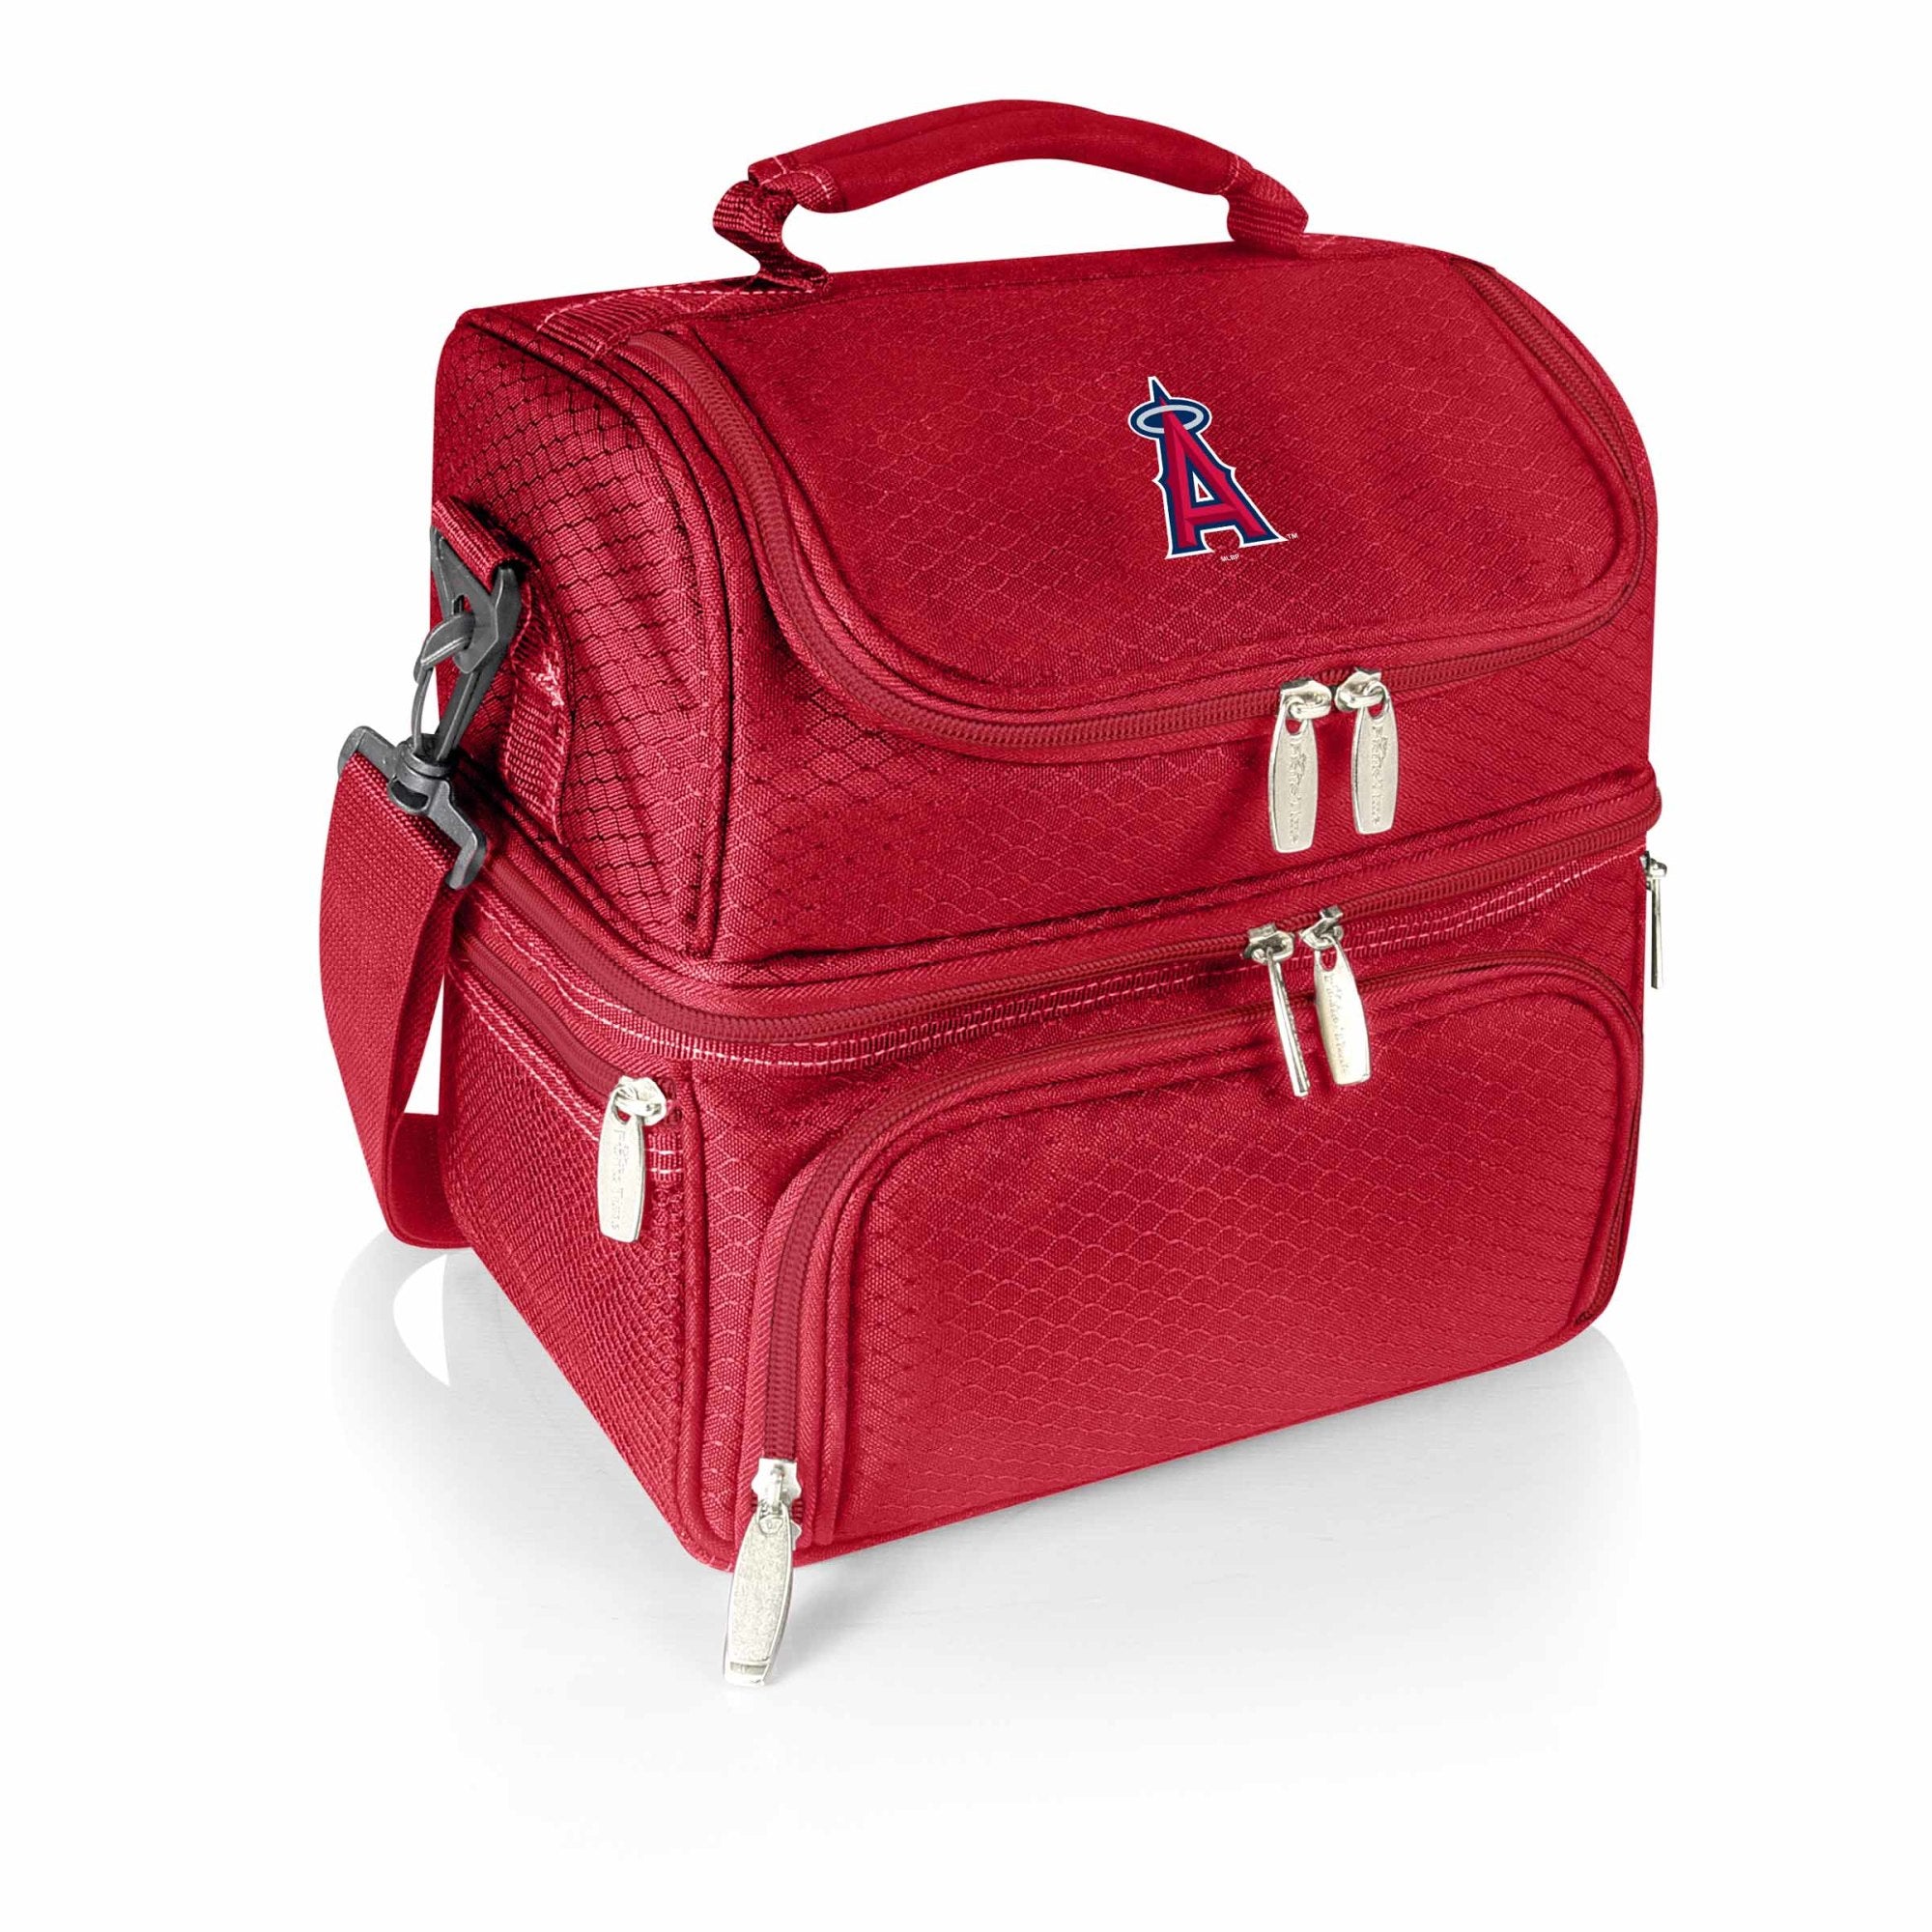 Los Angeles Angels - Pranzo Lunch Bag Cooler with Utensils